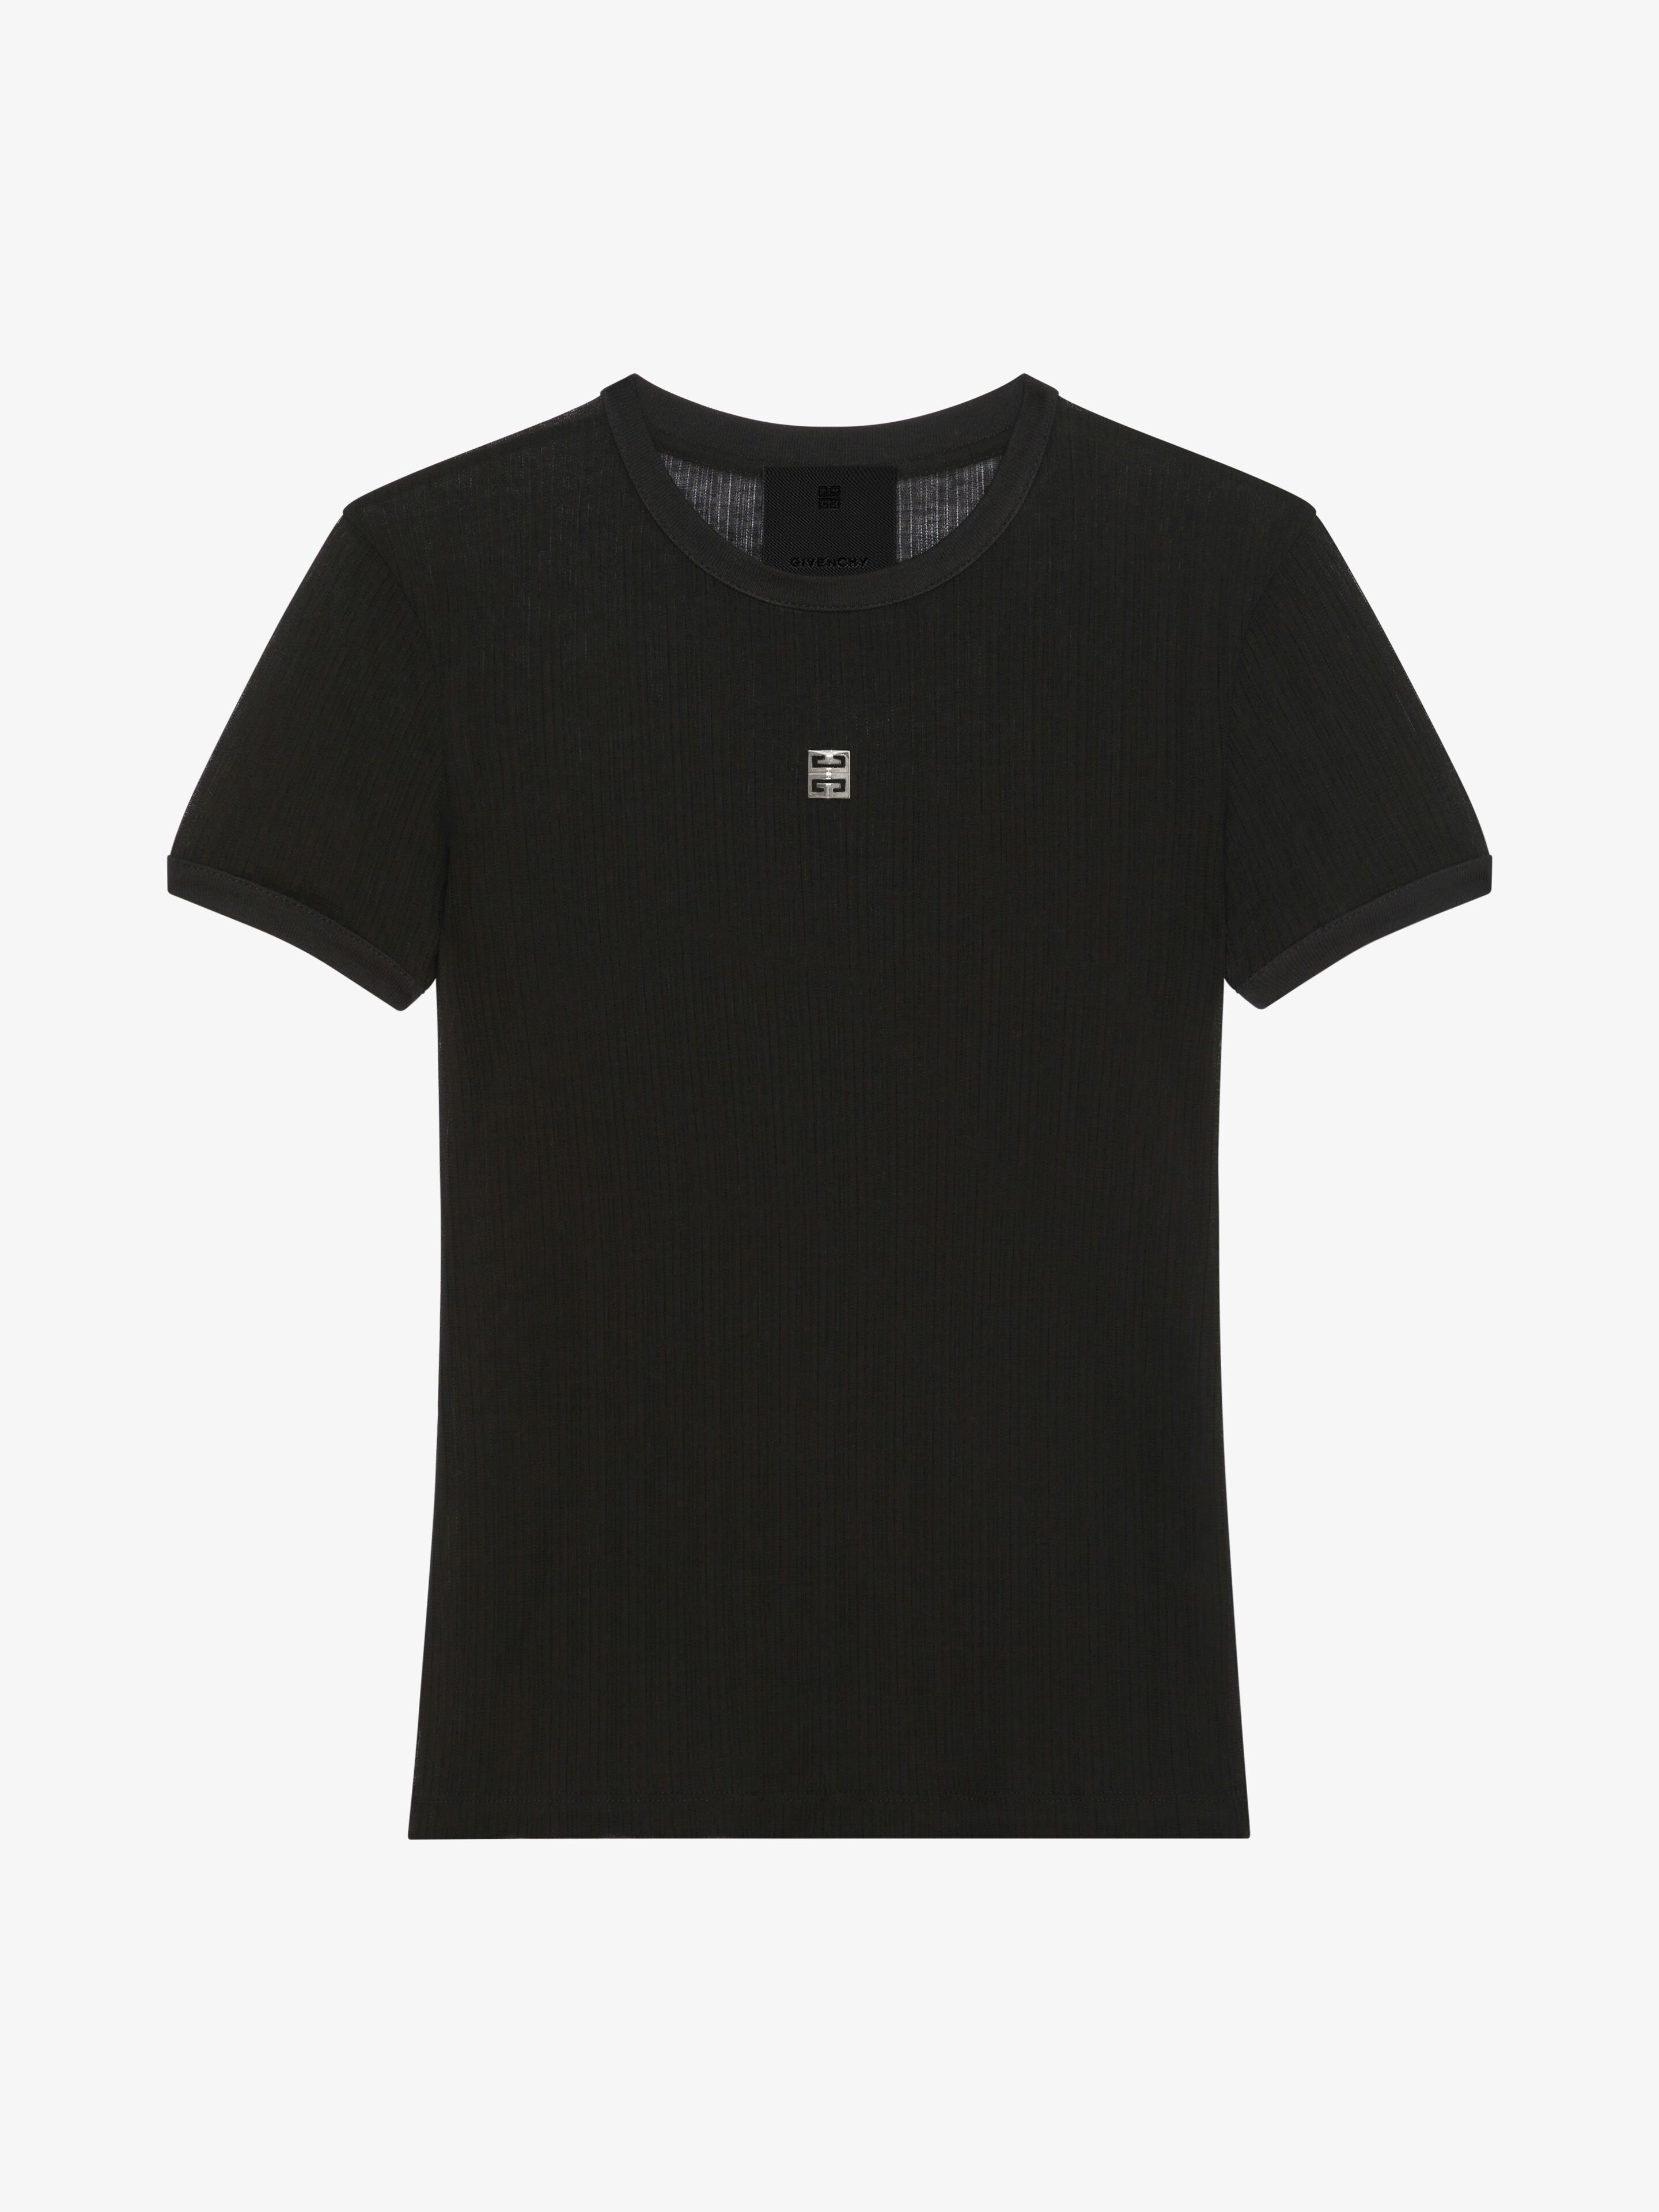 GIVENCHY SLIM FIT T-SHIRT IN TRANSPARENT COTTON